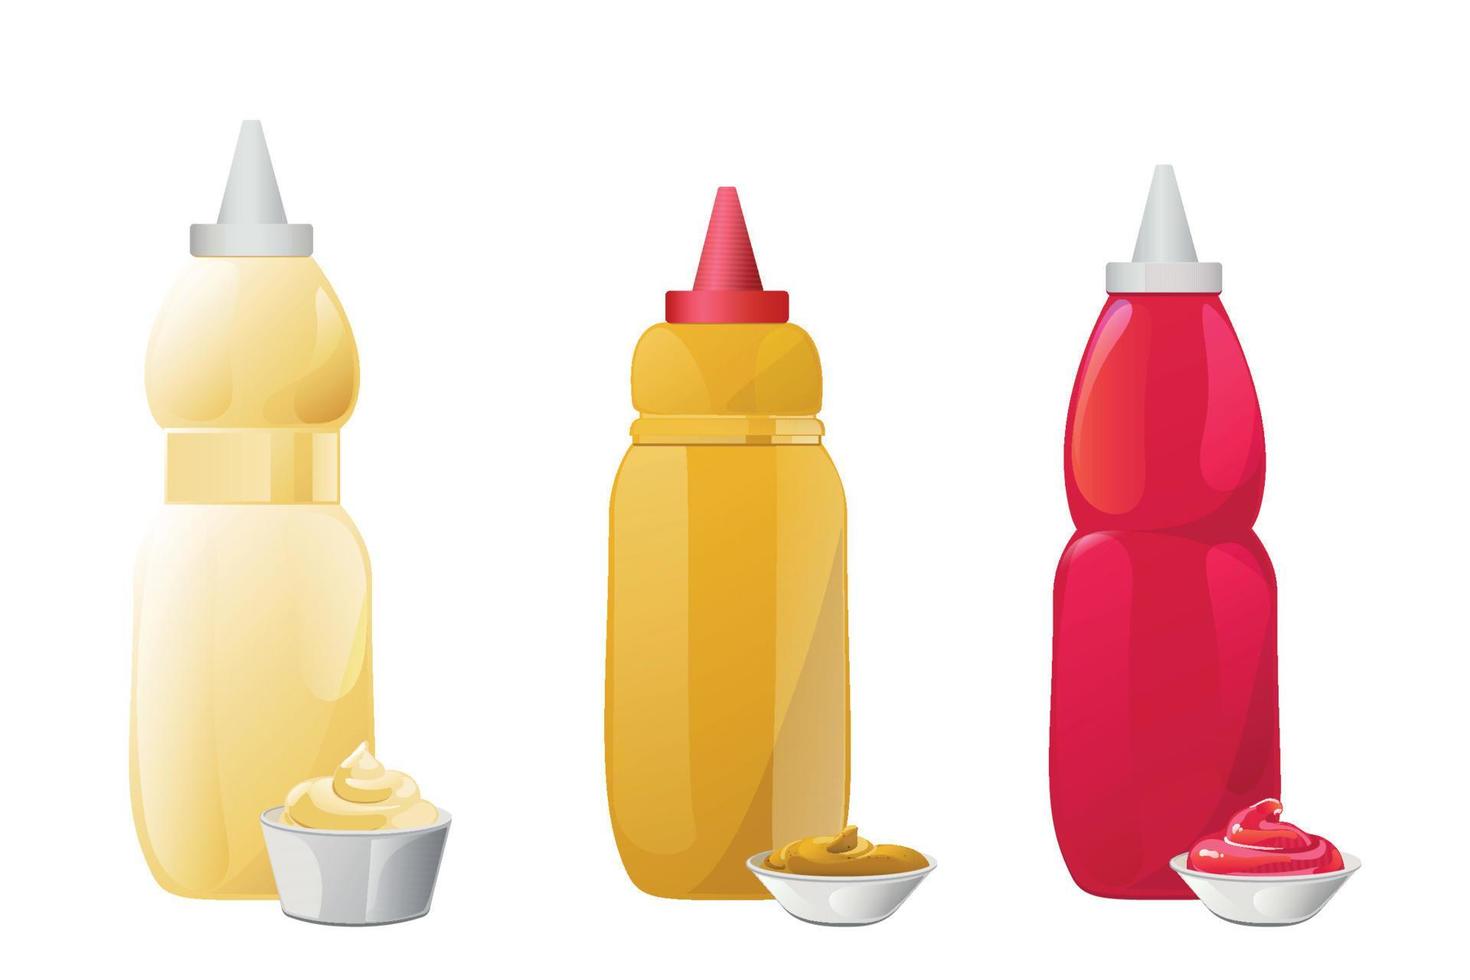 Ketchup, mayonnaise, mustard sauces set. Realistic vector illustration isolated on white background.